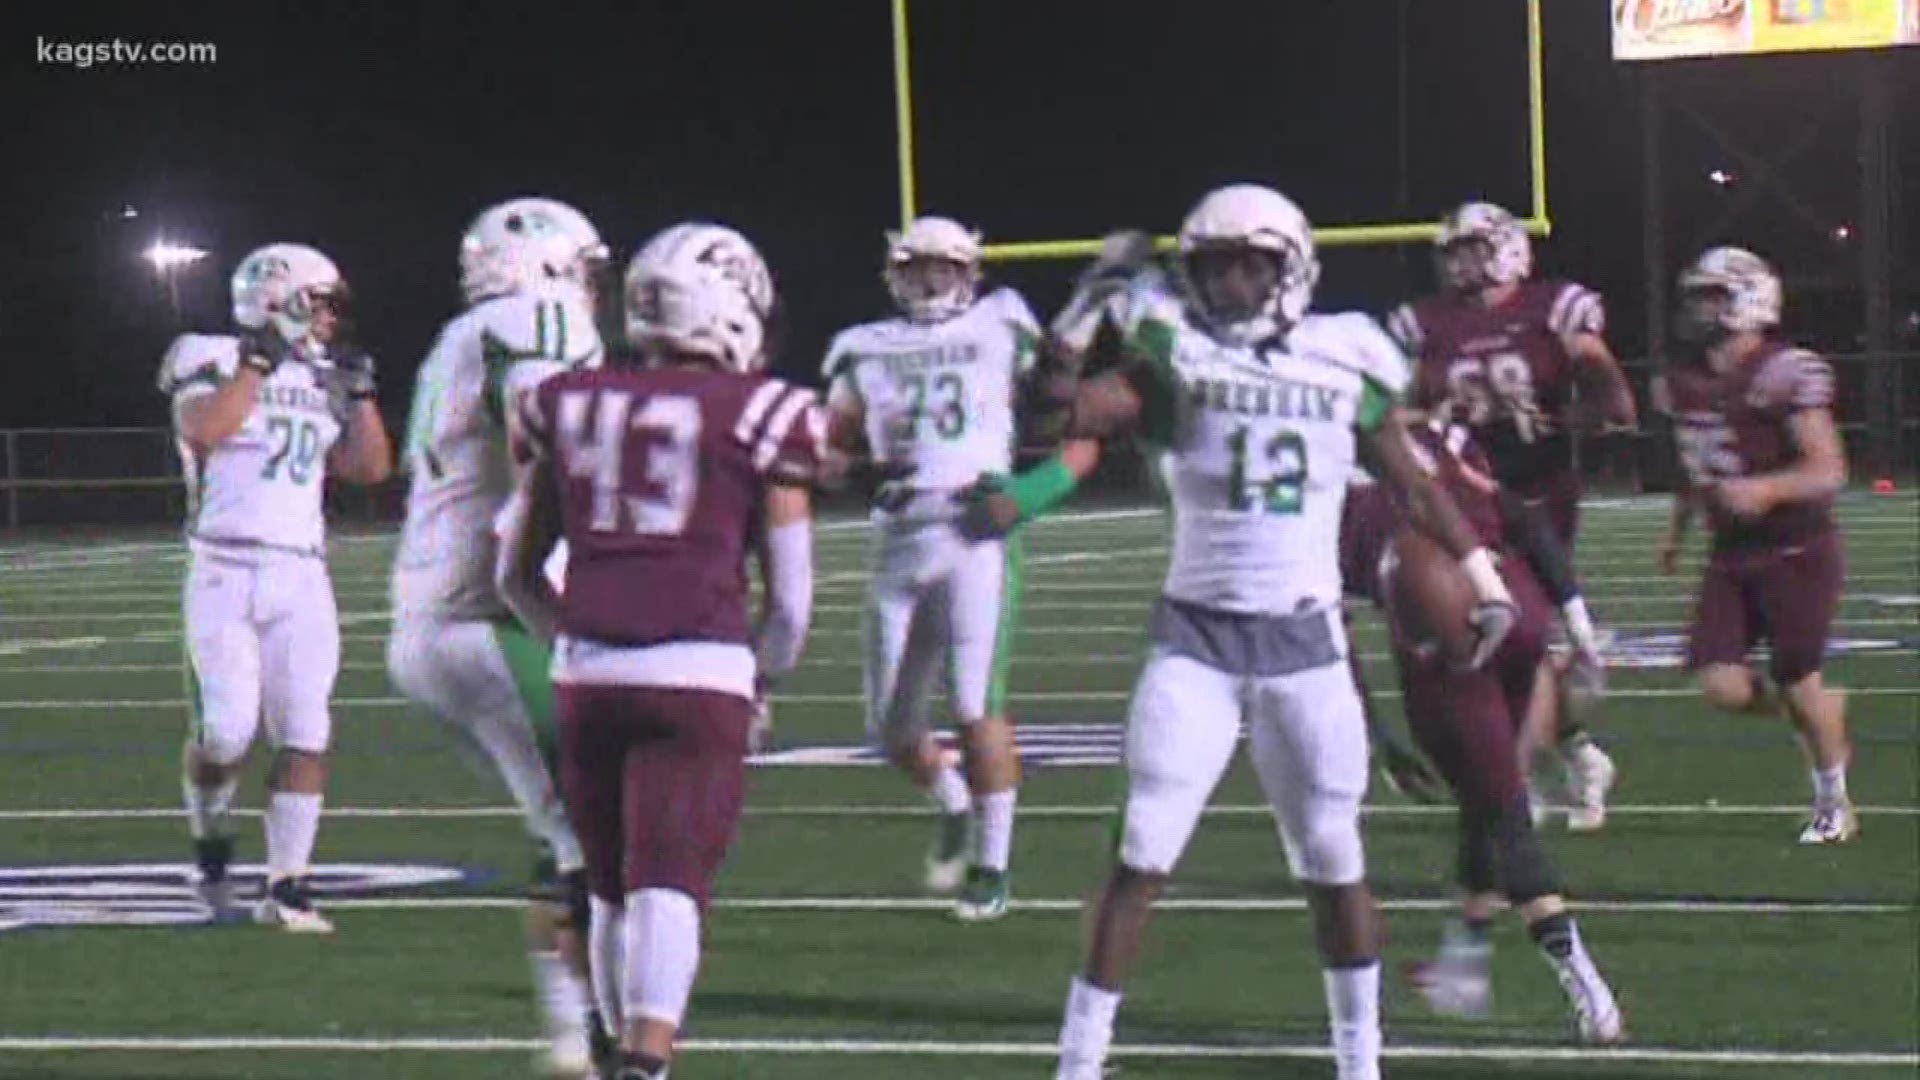 Here are scores and highlights from Friday night's regional semifinal action.